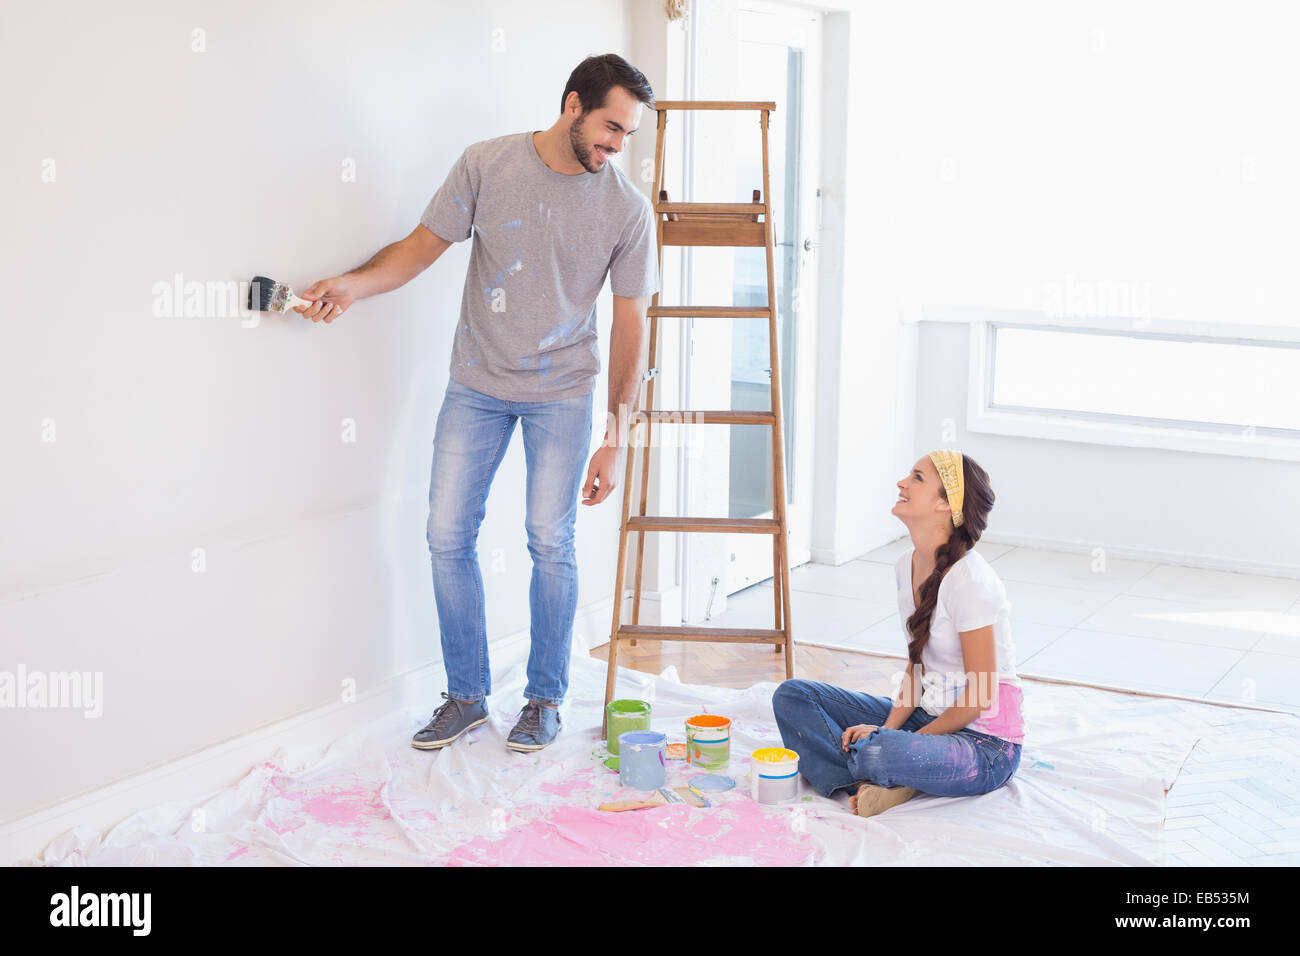 Cute couple redecorating living room Stock Photo - Alamy